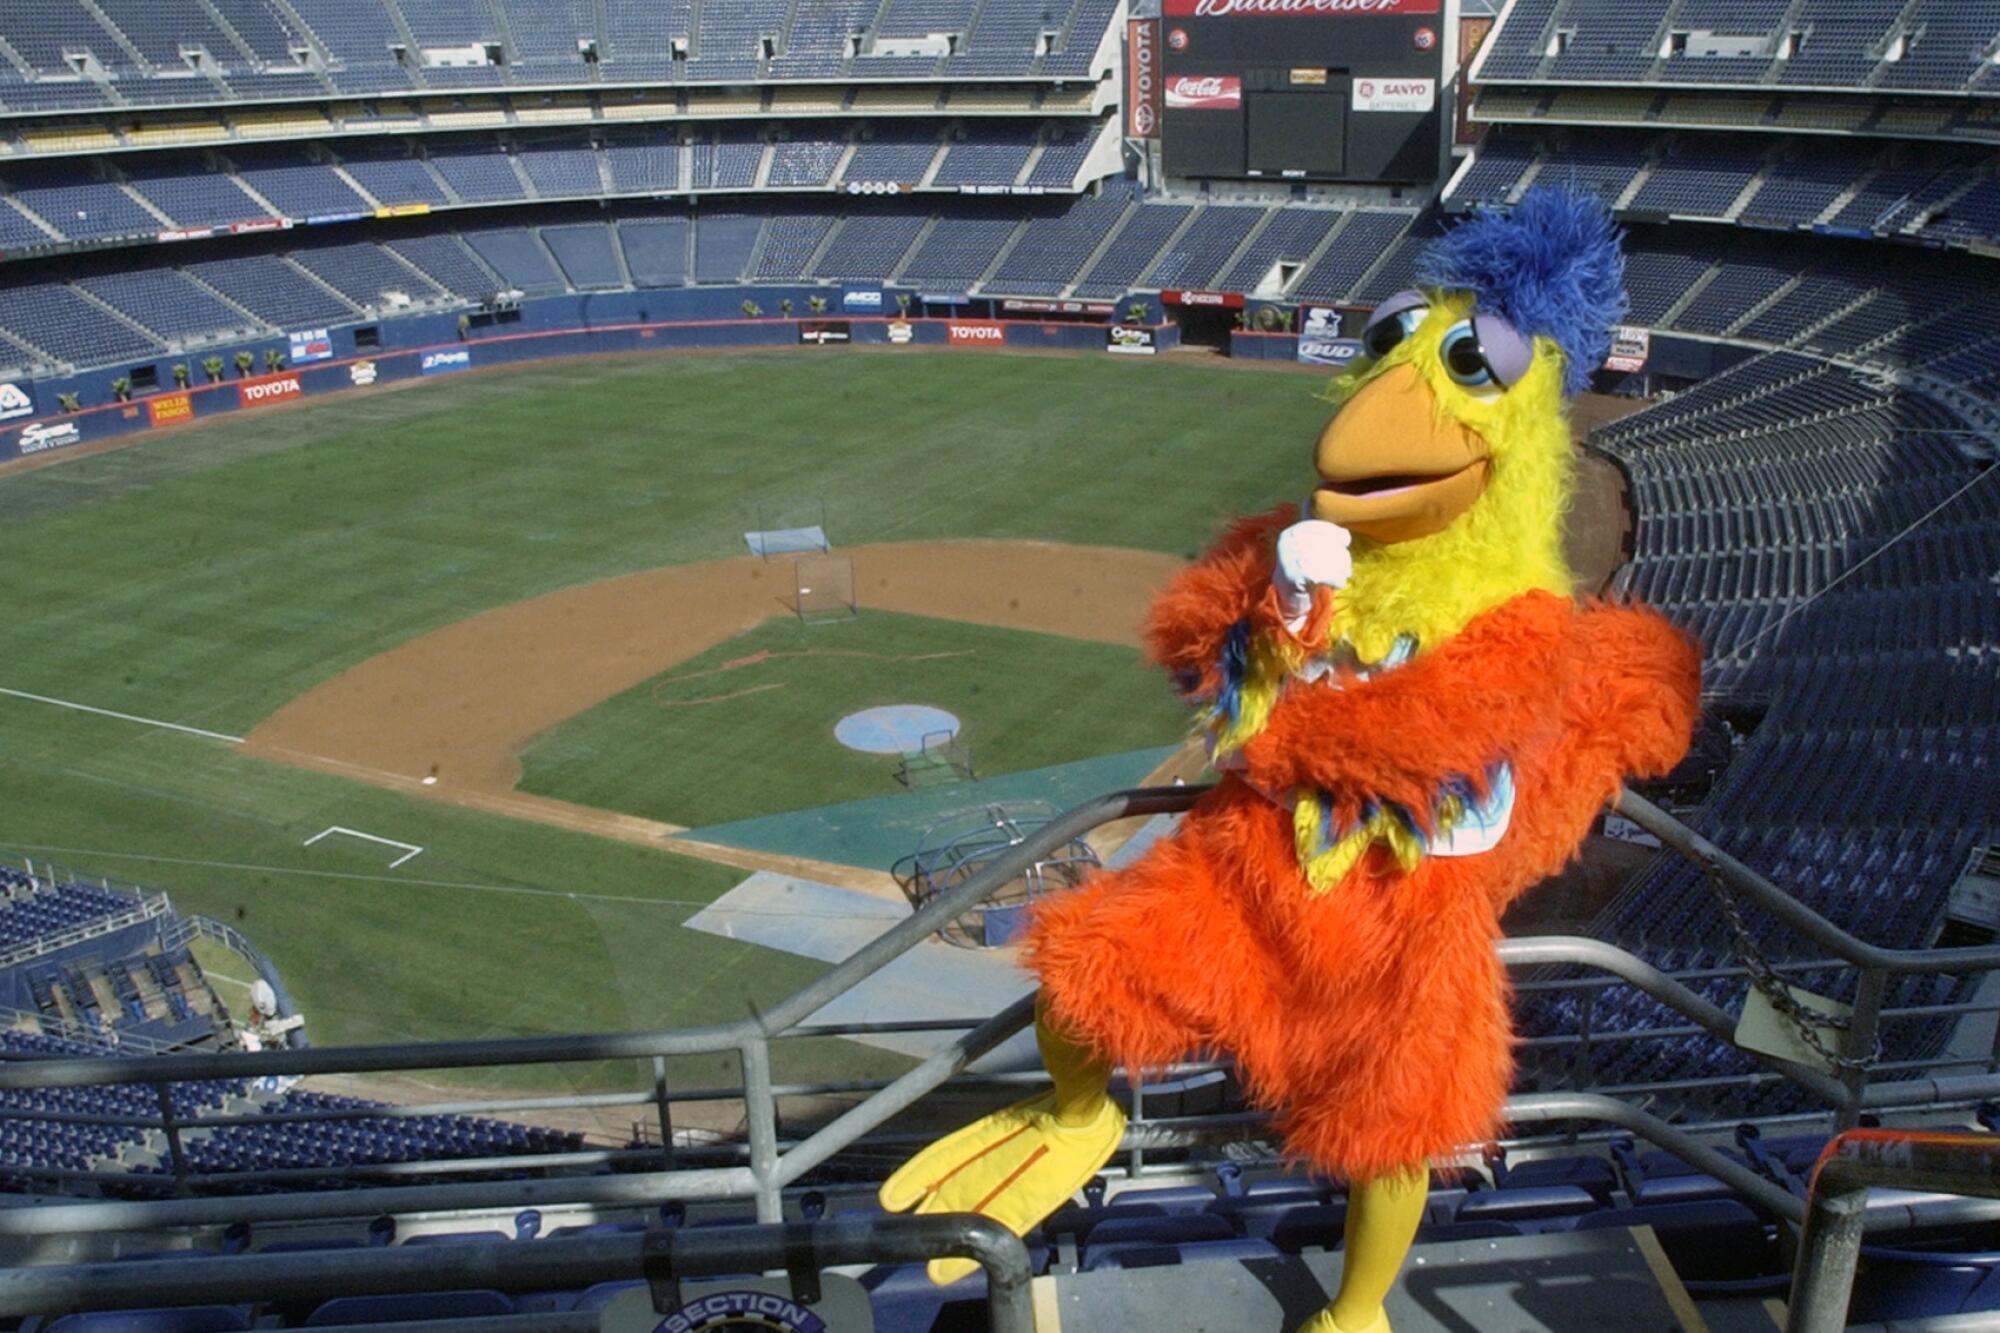 Ted Giannoulas, who began in 1974 as the KGB Chicken, pictured at Qualcomm Stadium in 2003 as The Famous San Diego Chicken.